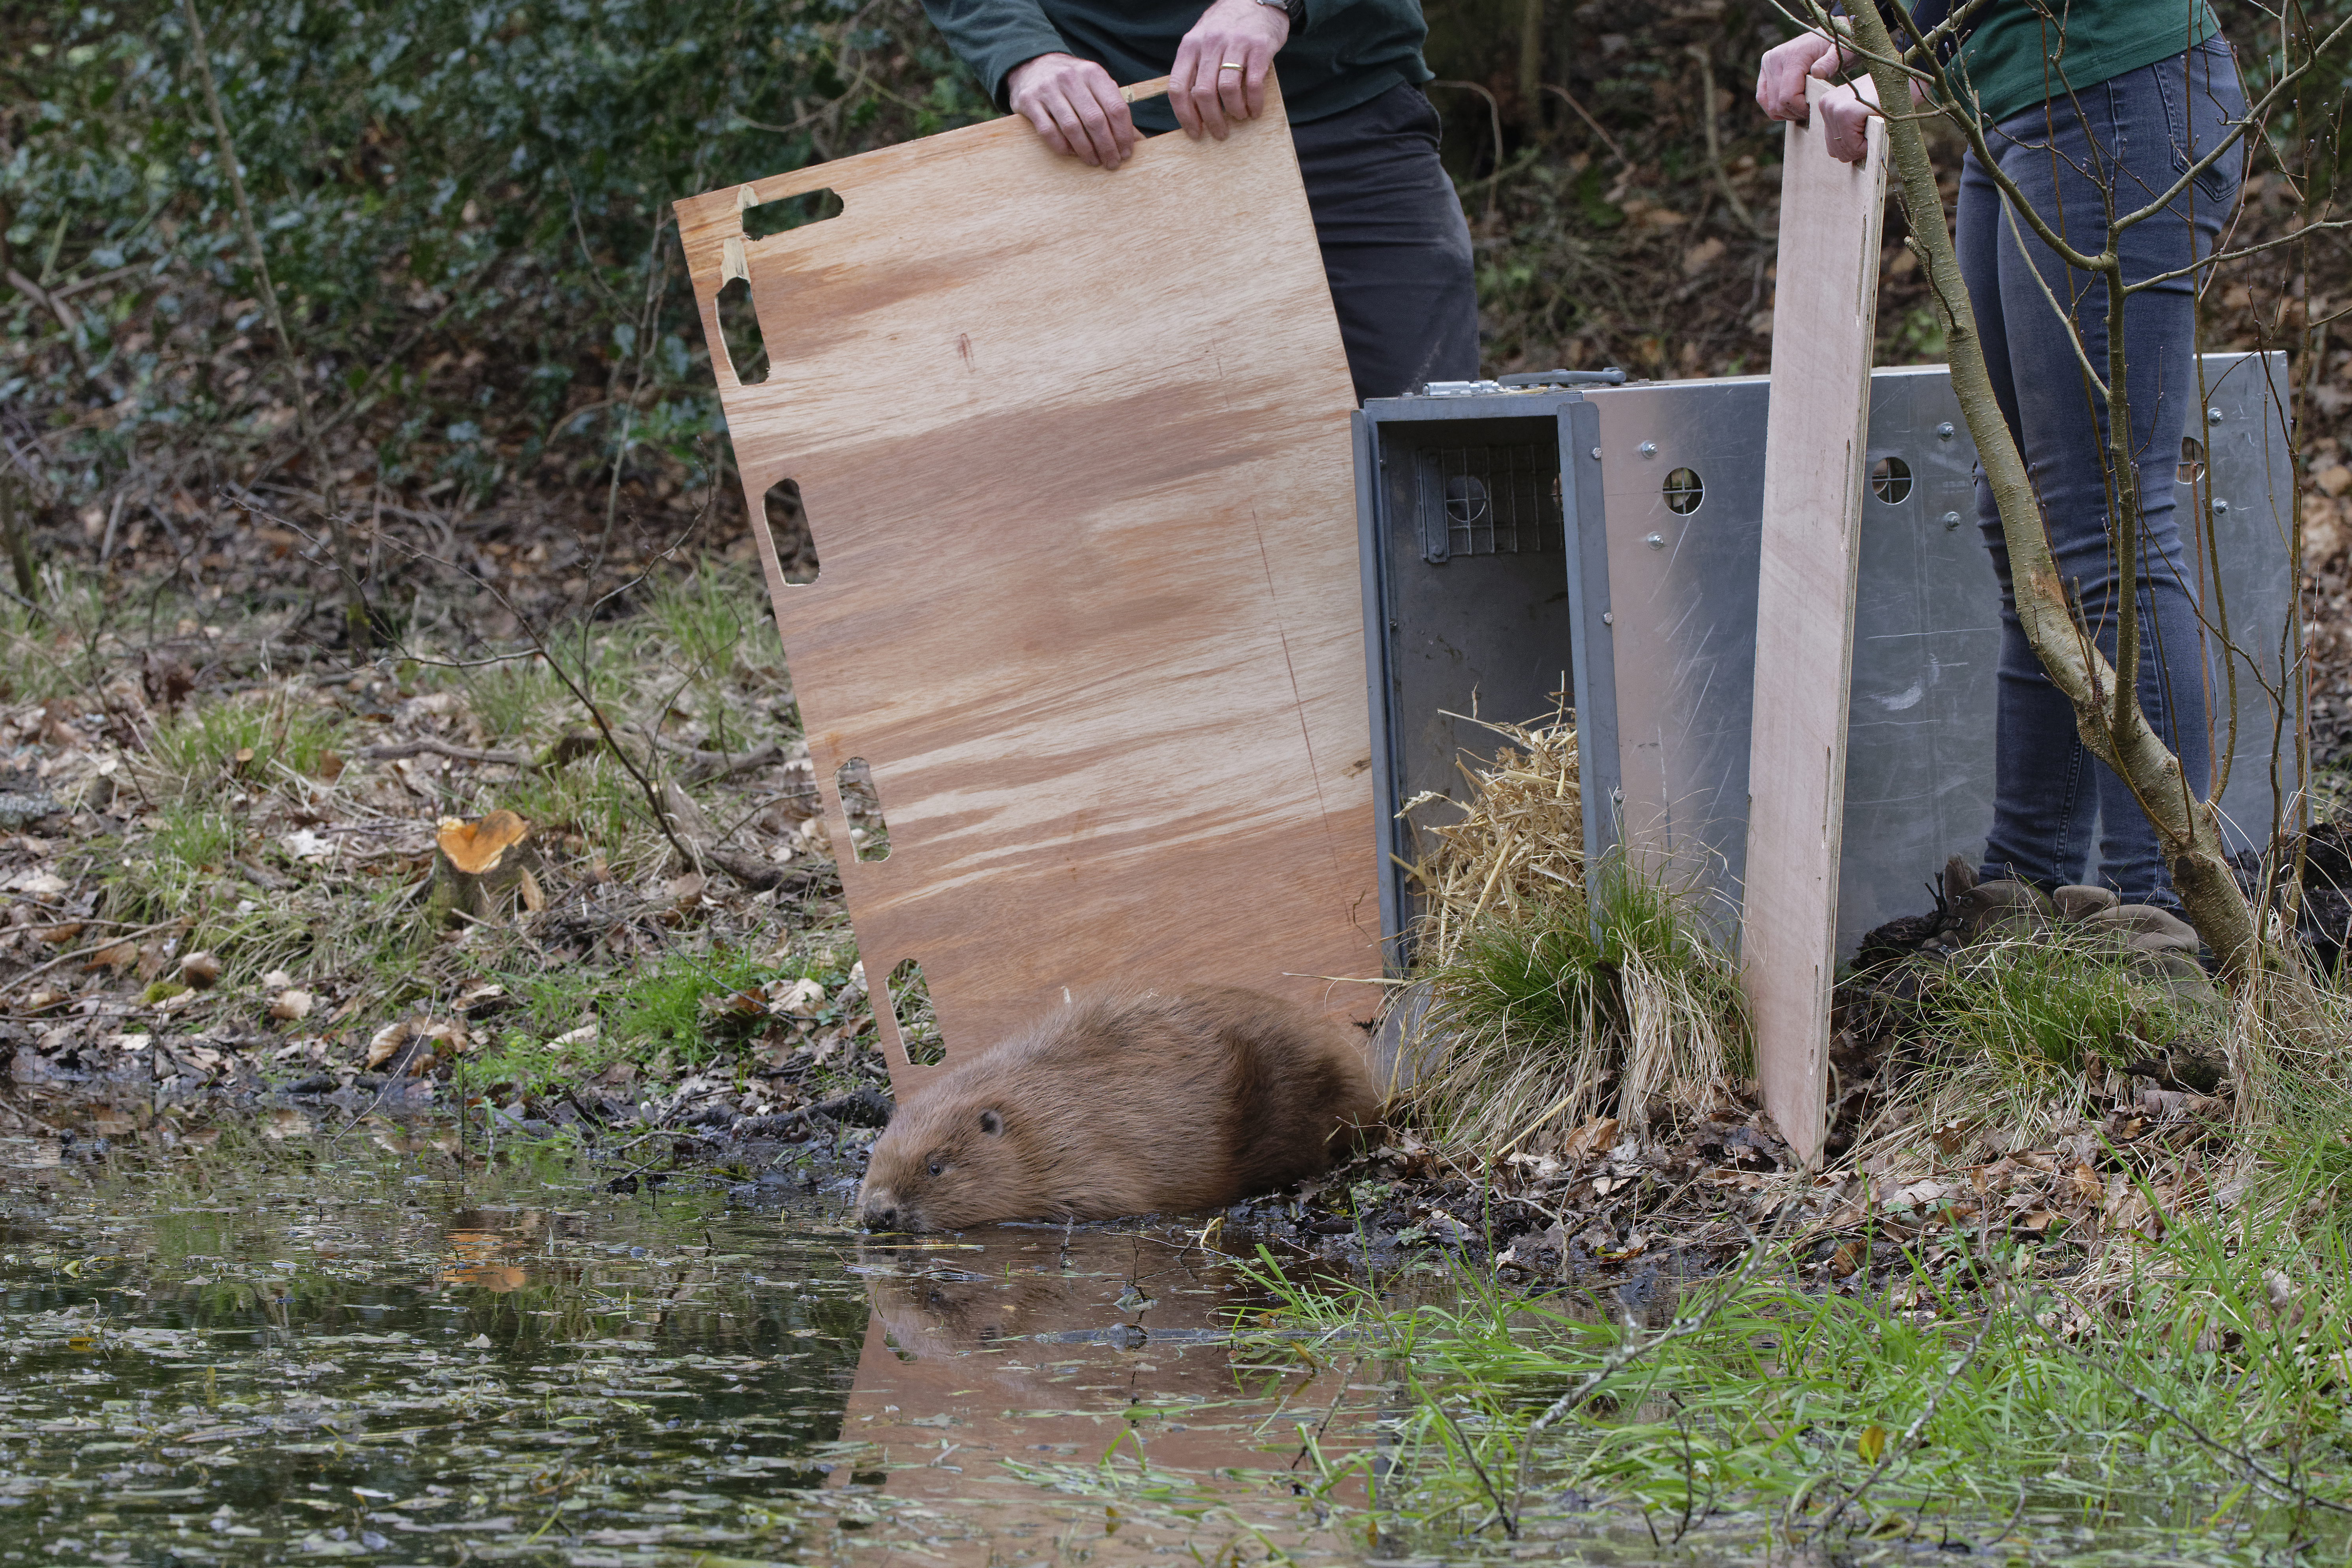 Beaver being released from its container into a pond